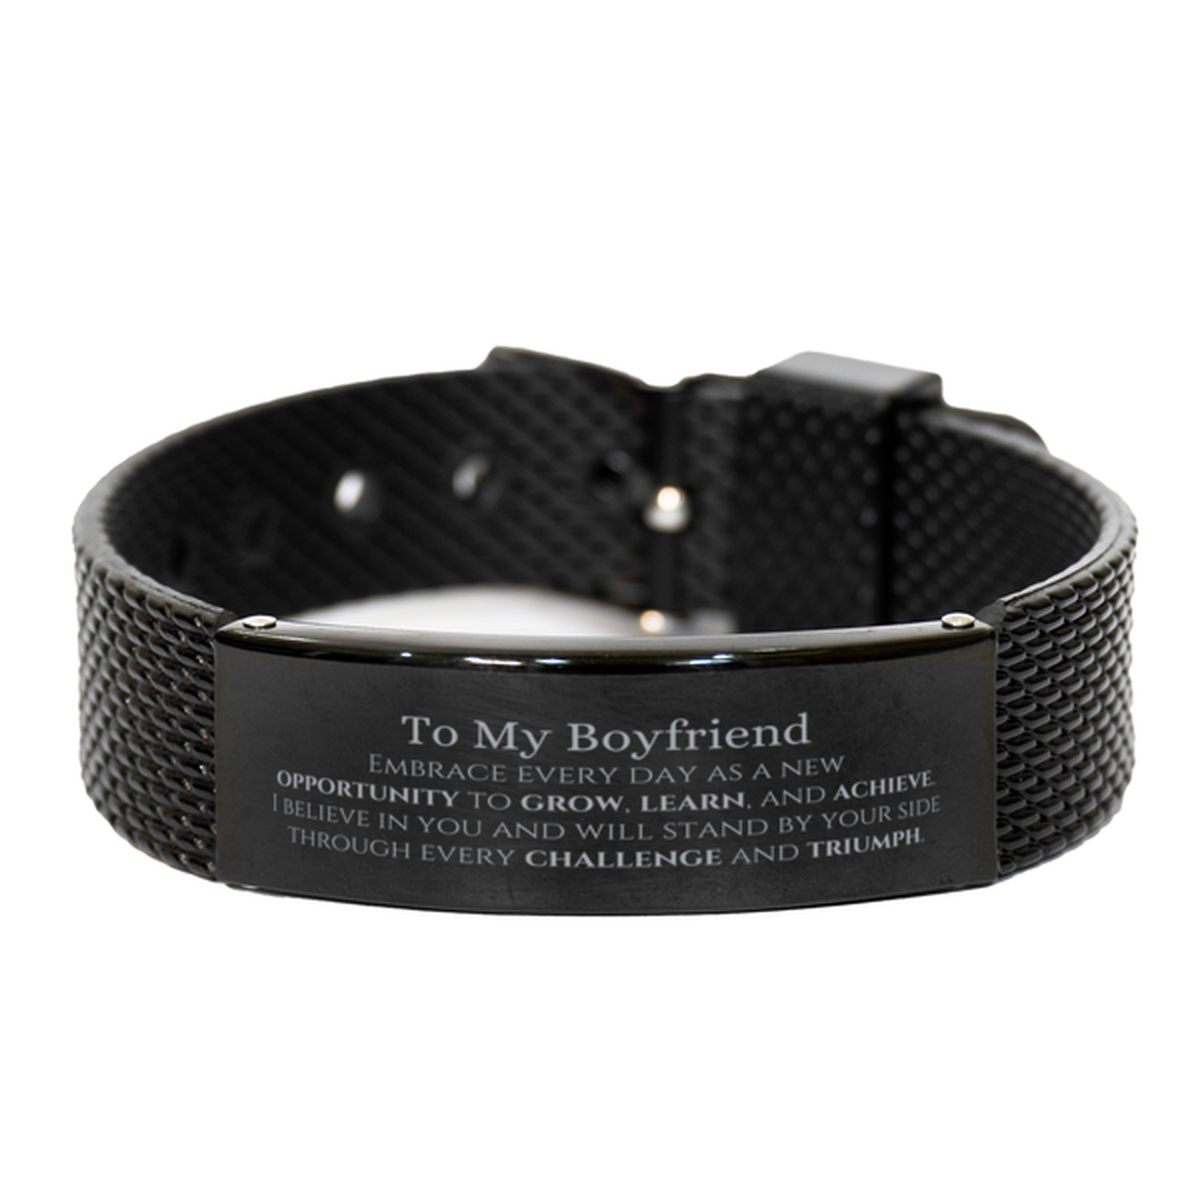 To My Boyfriend Gifts, I believe in you and will stand by your side, Inspirational Black Shark Mesh Bracelet For Boyfriend, Birthday Christmas Motivational Boyfriend Gifts